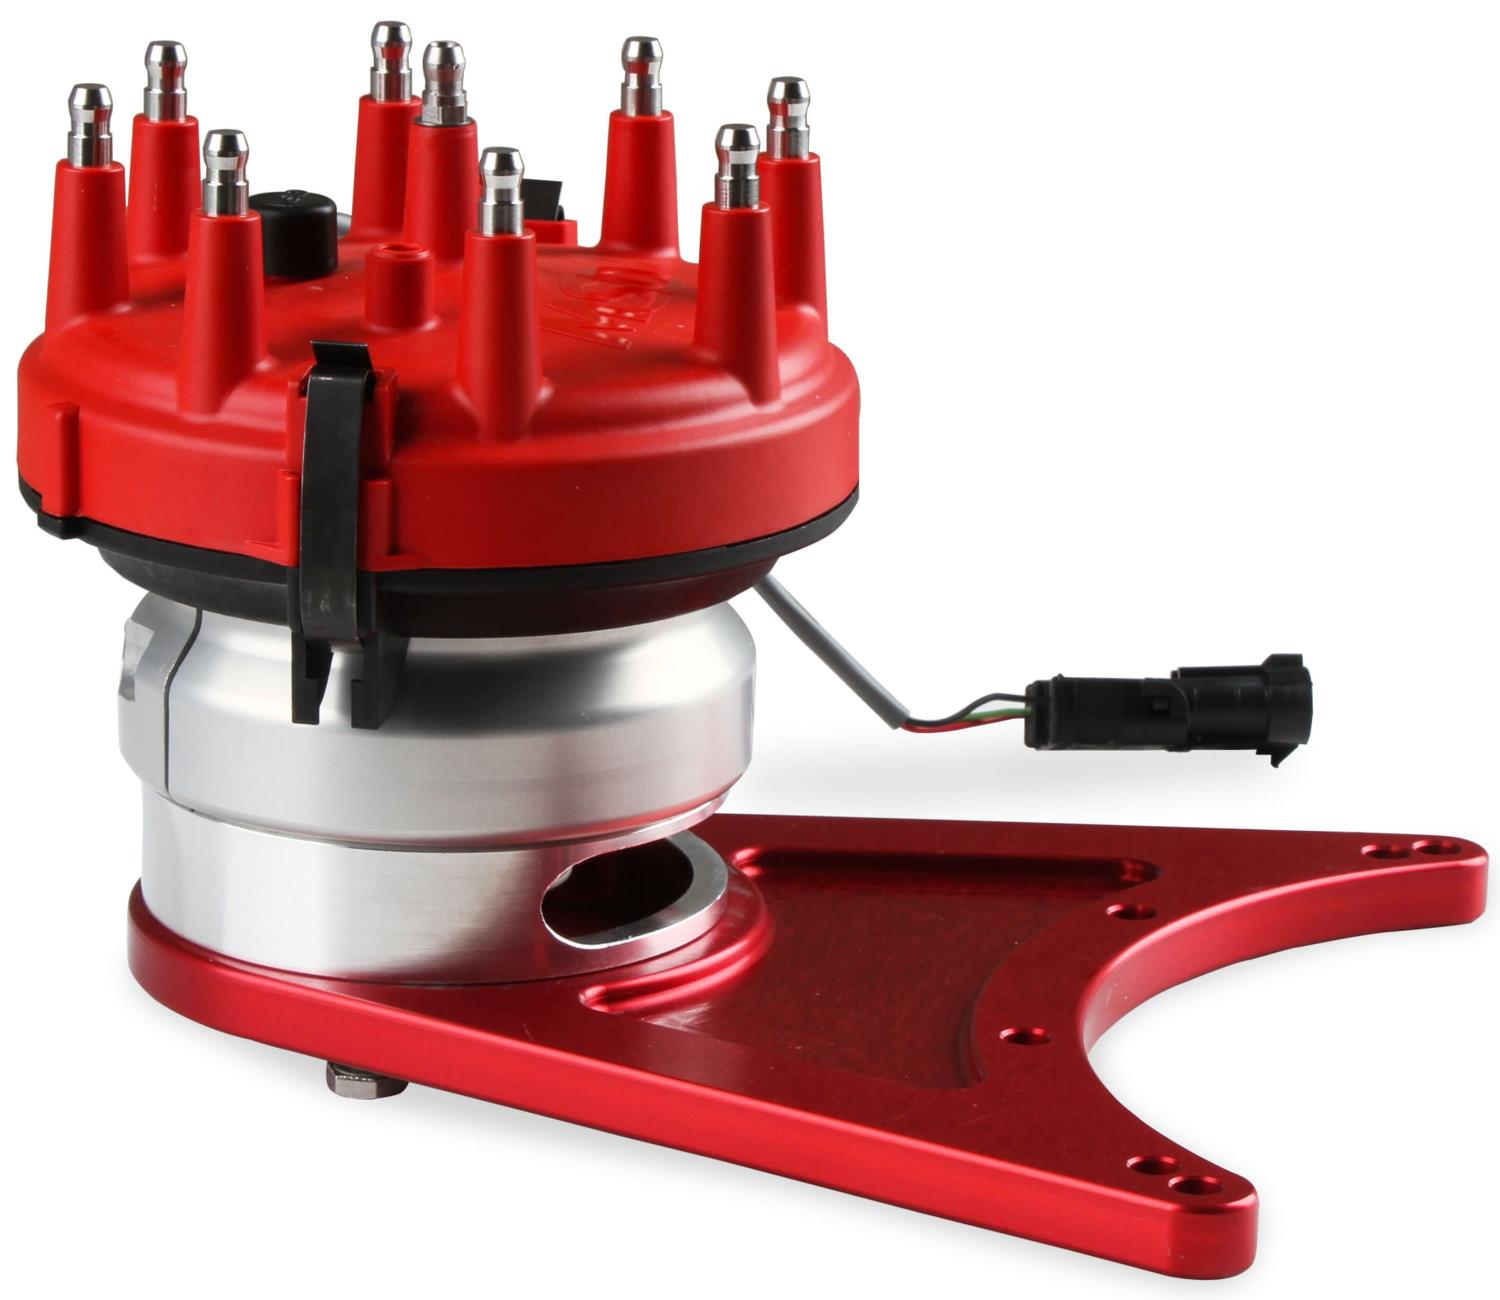 Pro-Billet Front Drive Distributor w/Adjustable Hall-Effect Sync Pickup for Big Block Chevy - Red HEI Cap